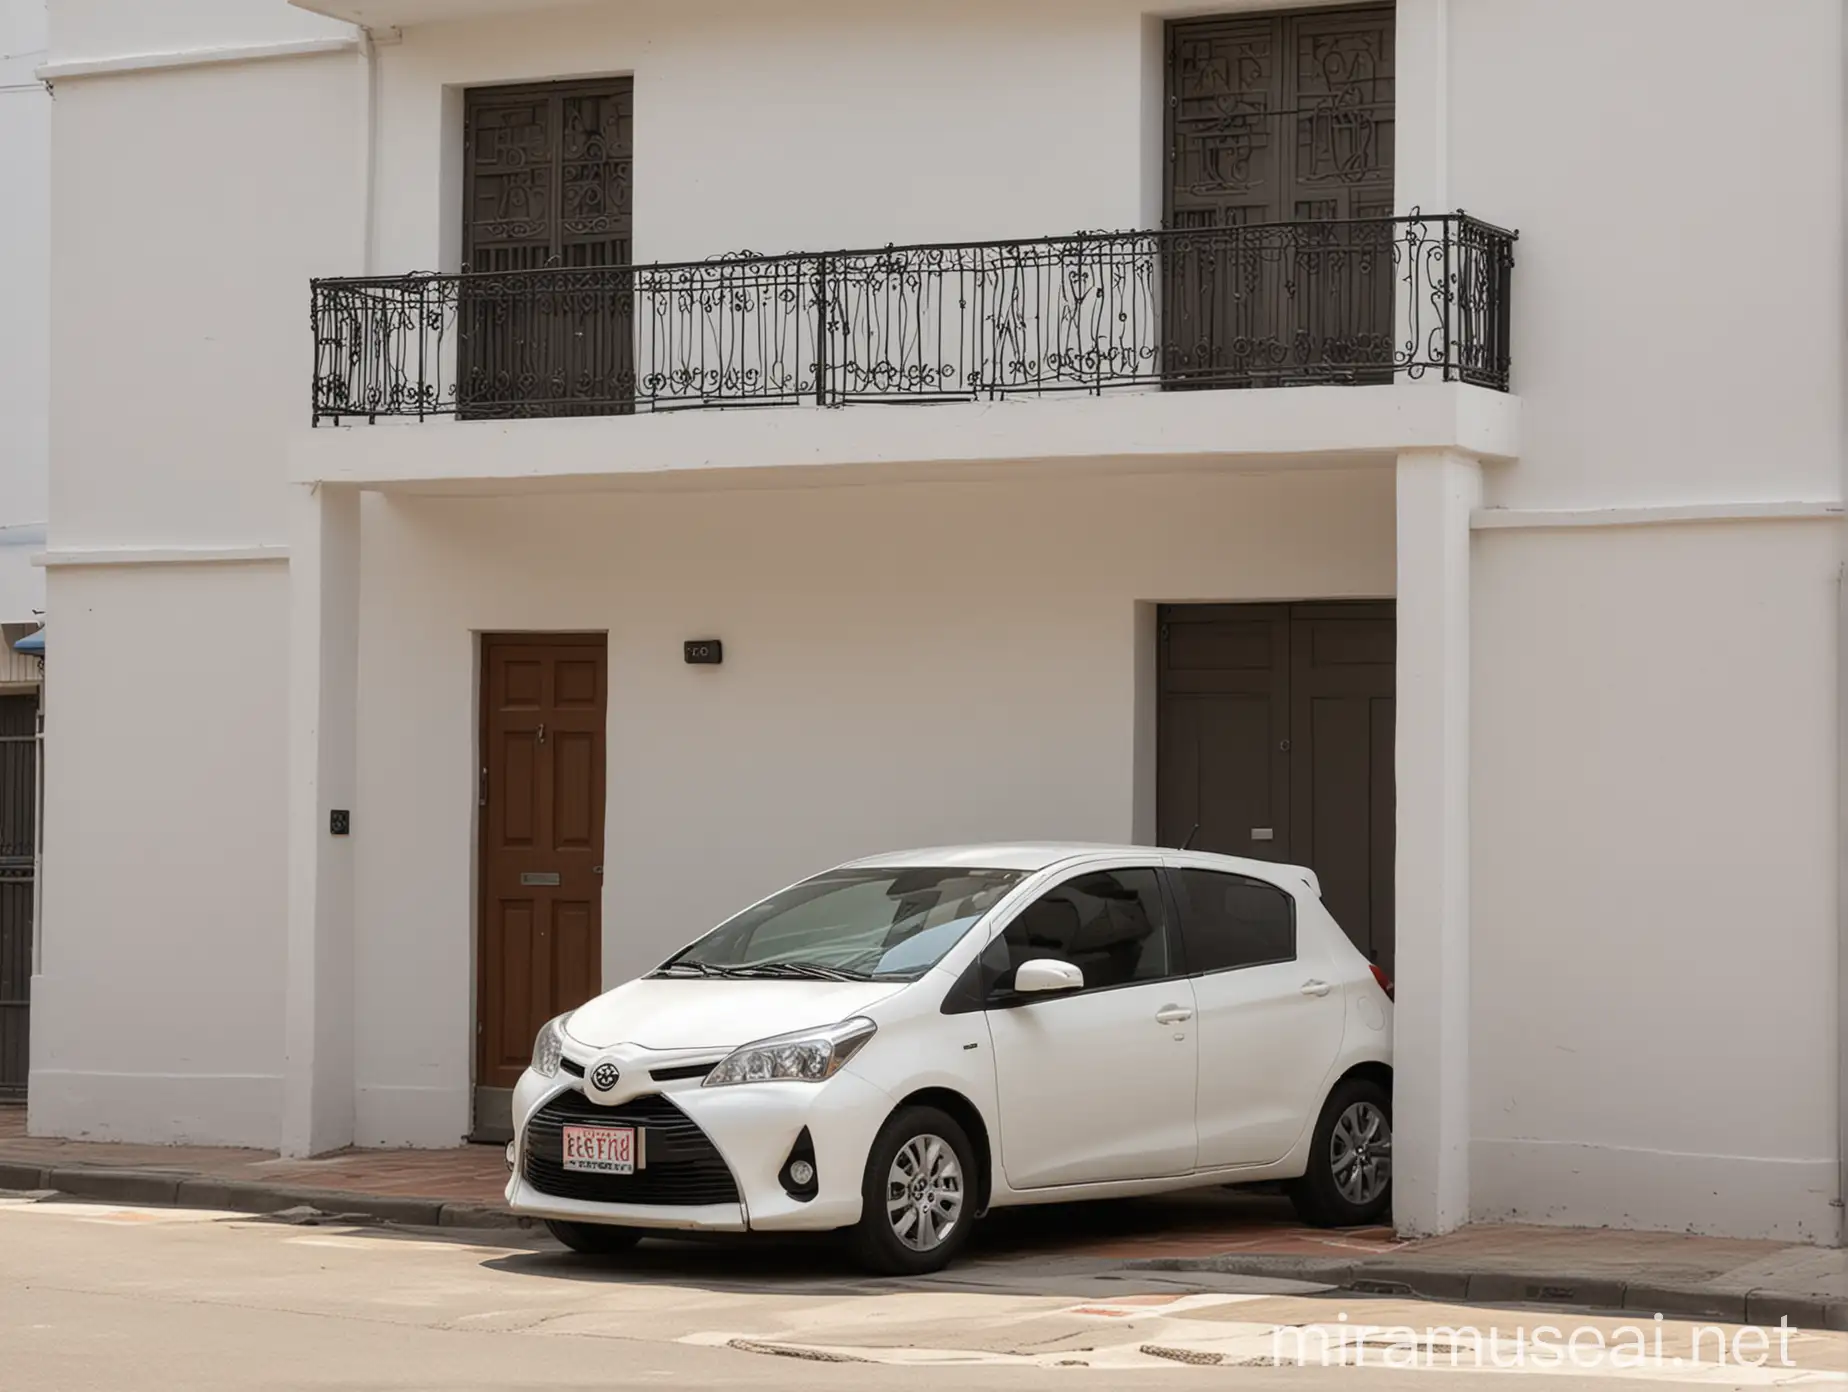 Peruvian TwoStory House with White Toyota Yaris Parked